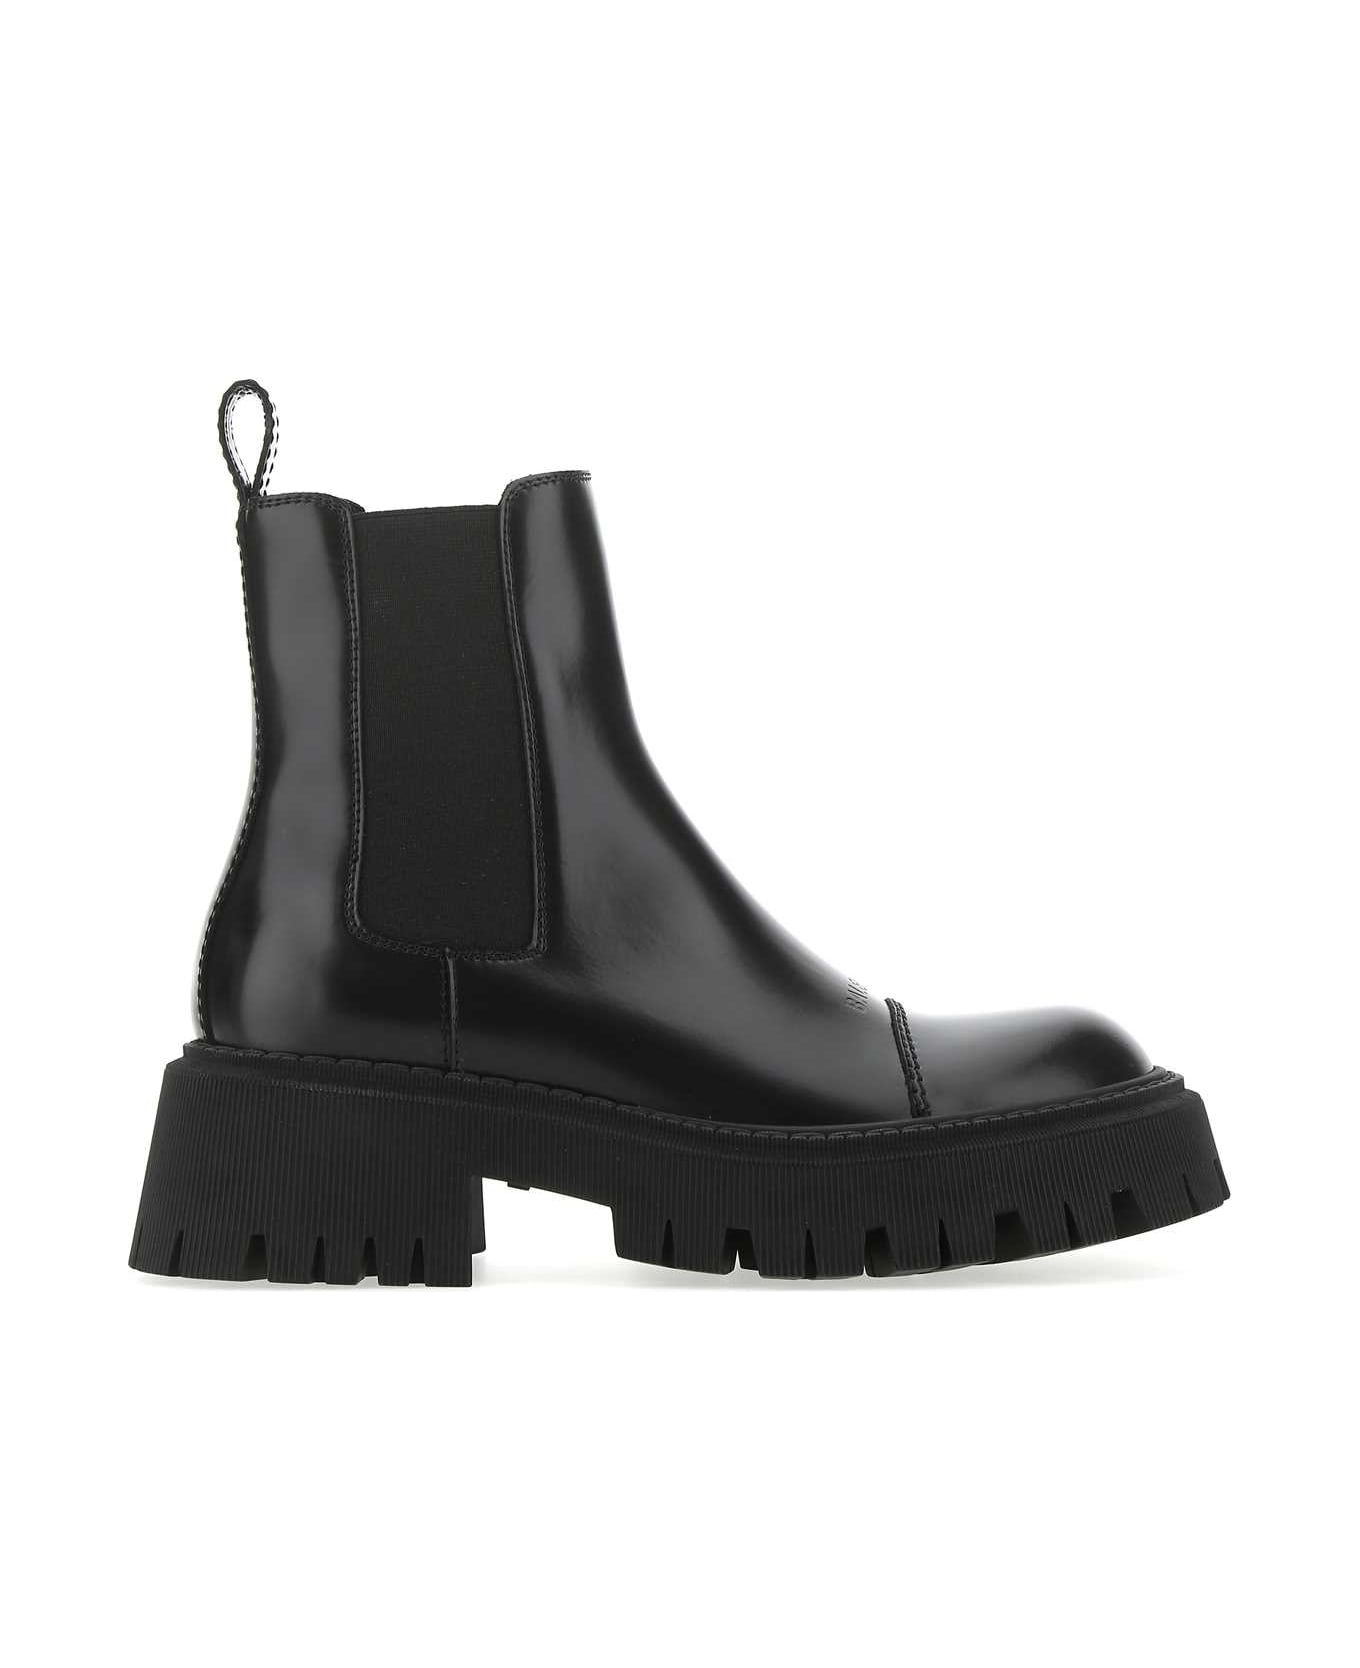 Balenciaga Black Leather Tractor Ankle Boots - BLACK ブーツ